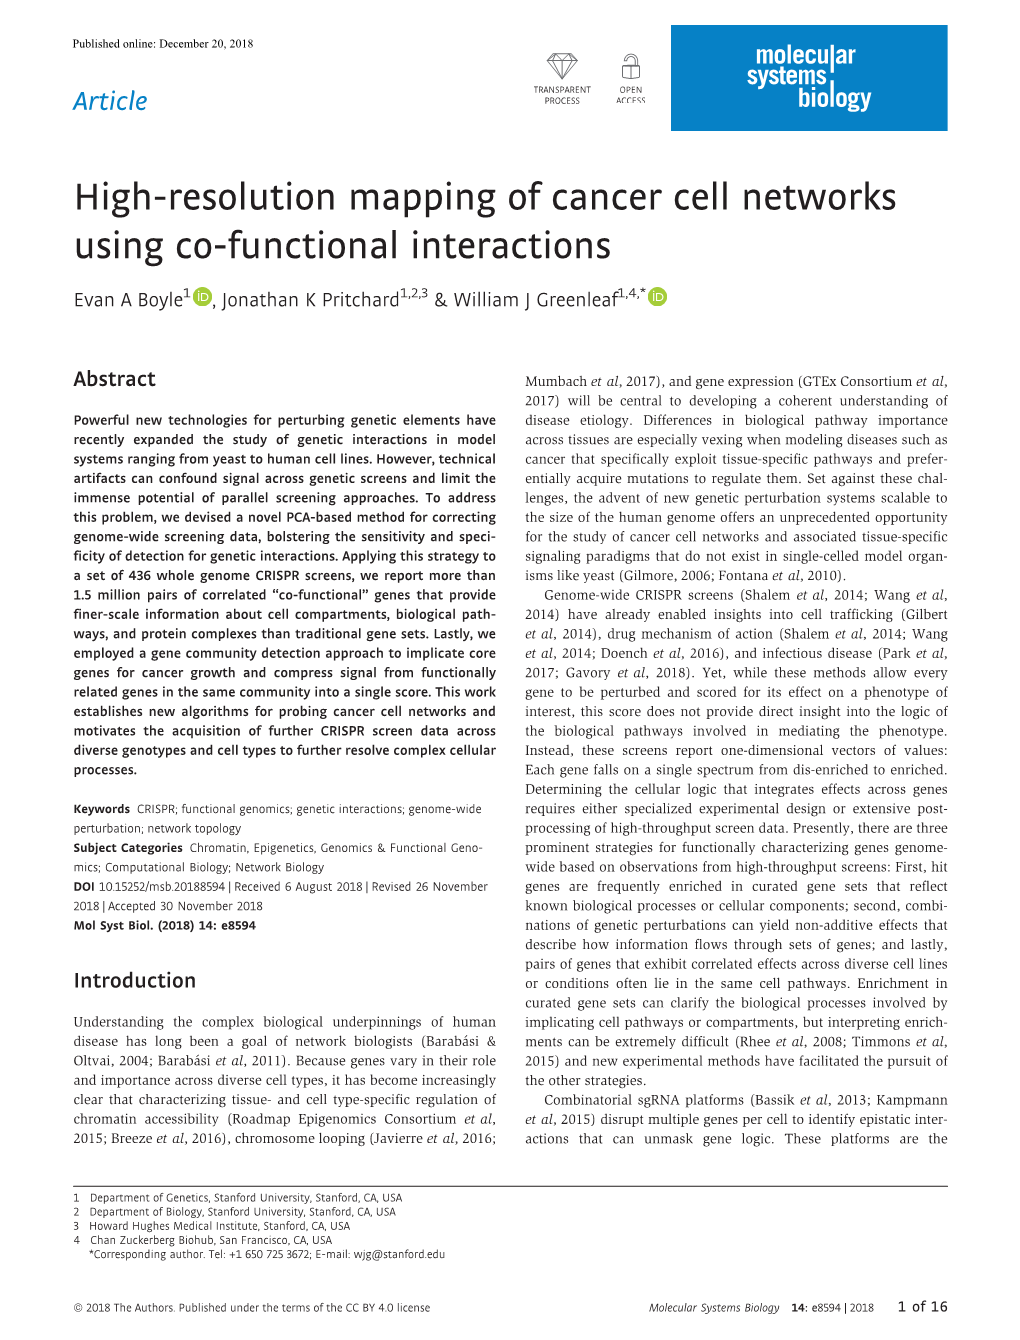 High‐Resolution Mapping of Cancer Cell Networks Using Co‐Functional